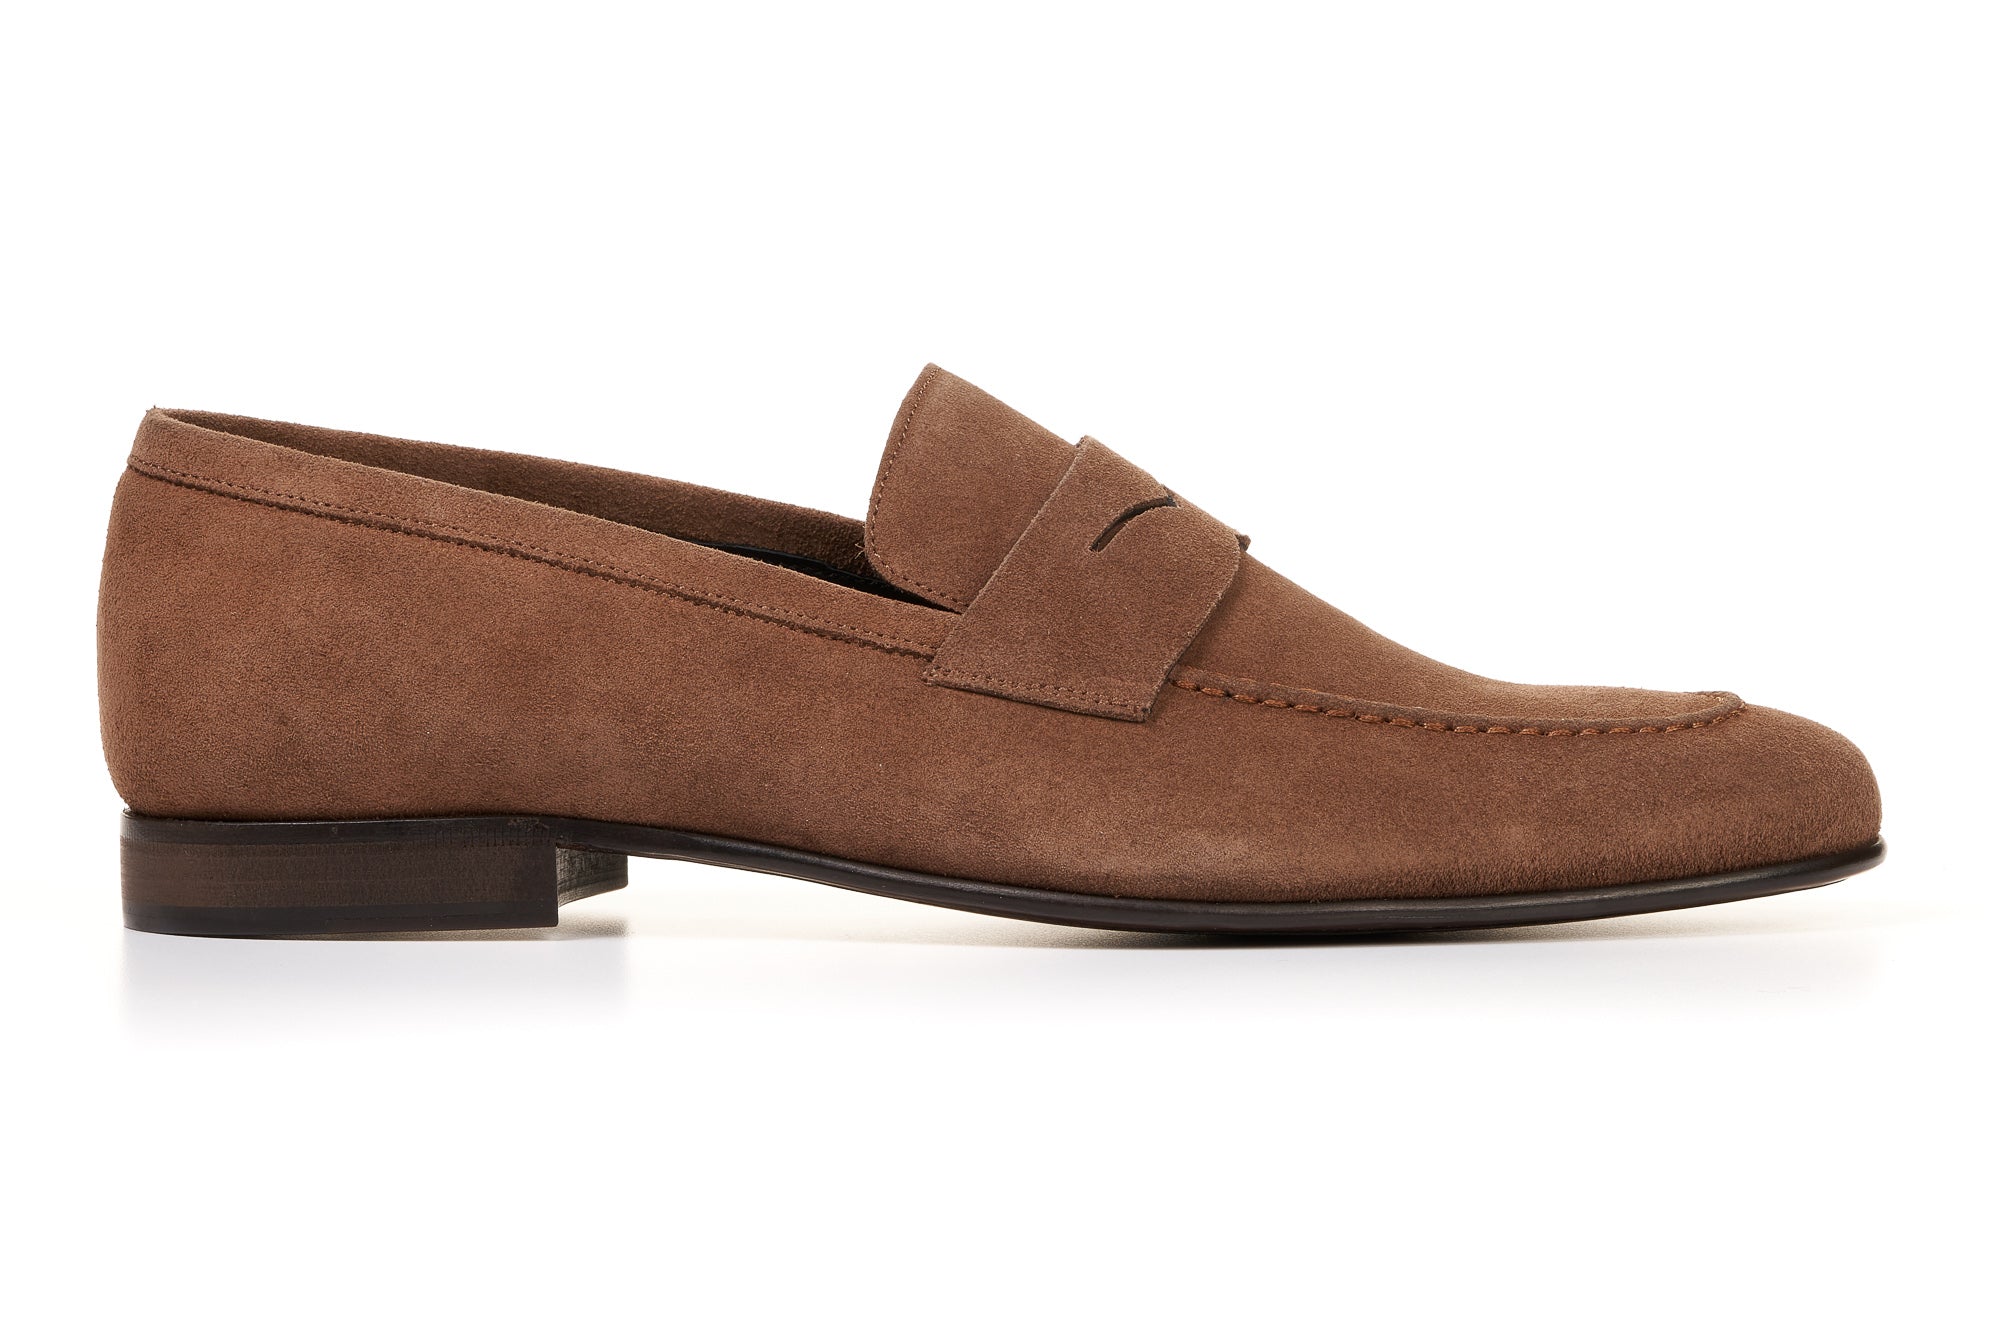 The Edward Penny Loafer - Light Brown Suede